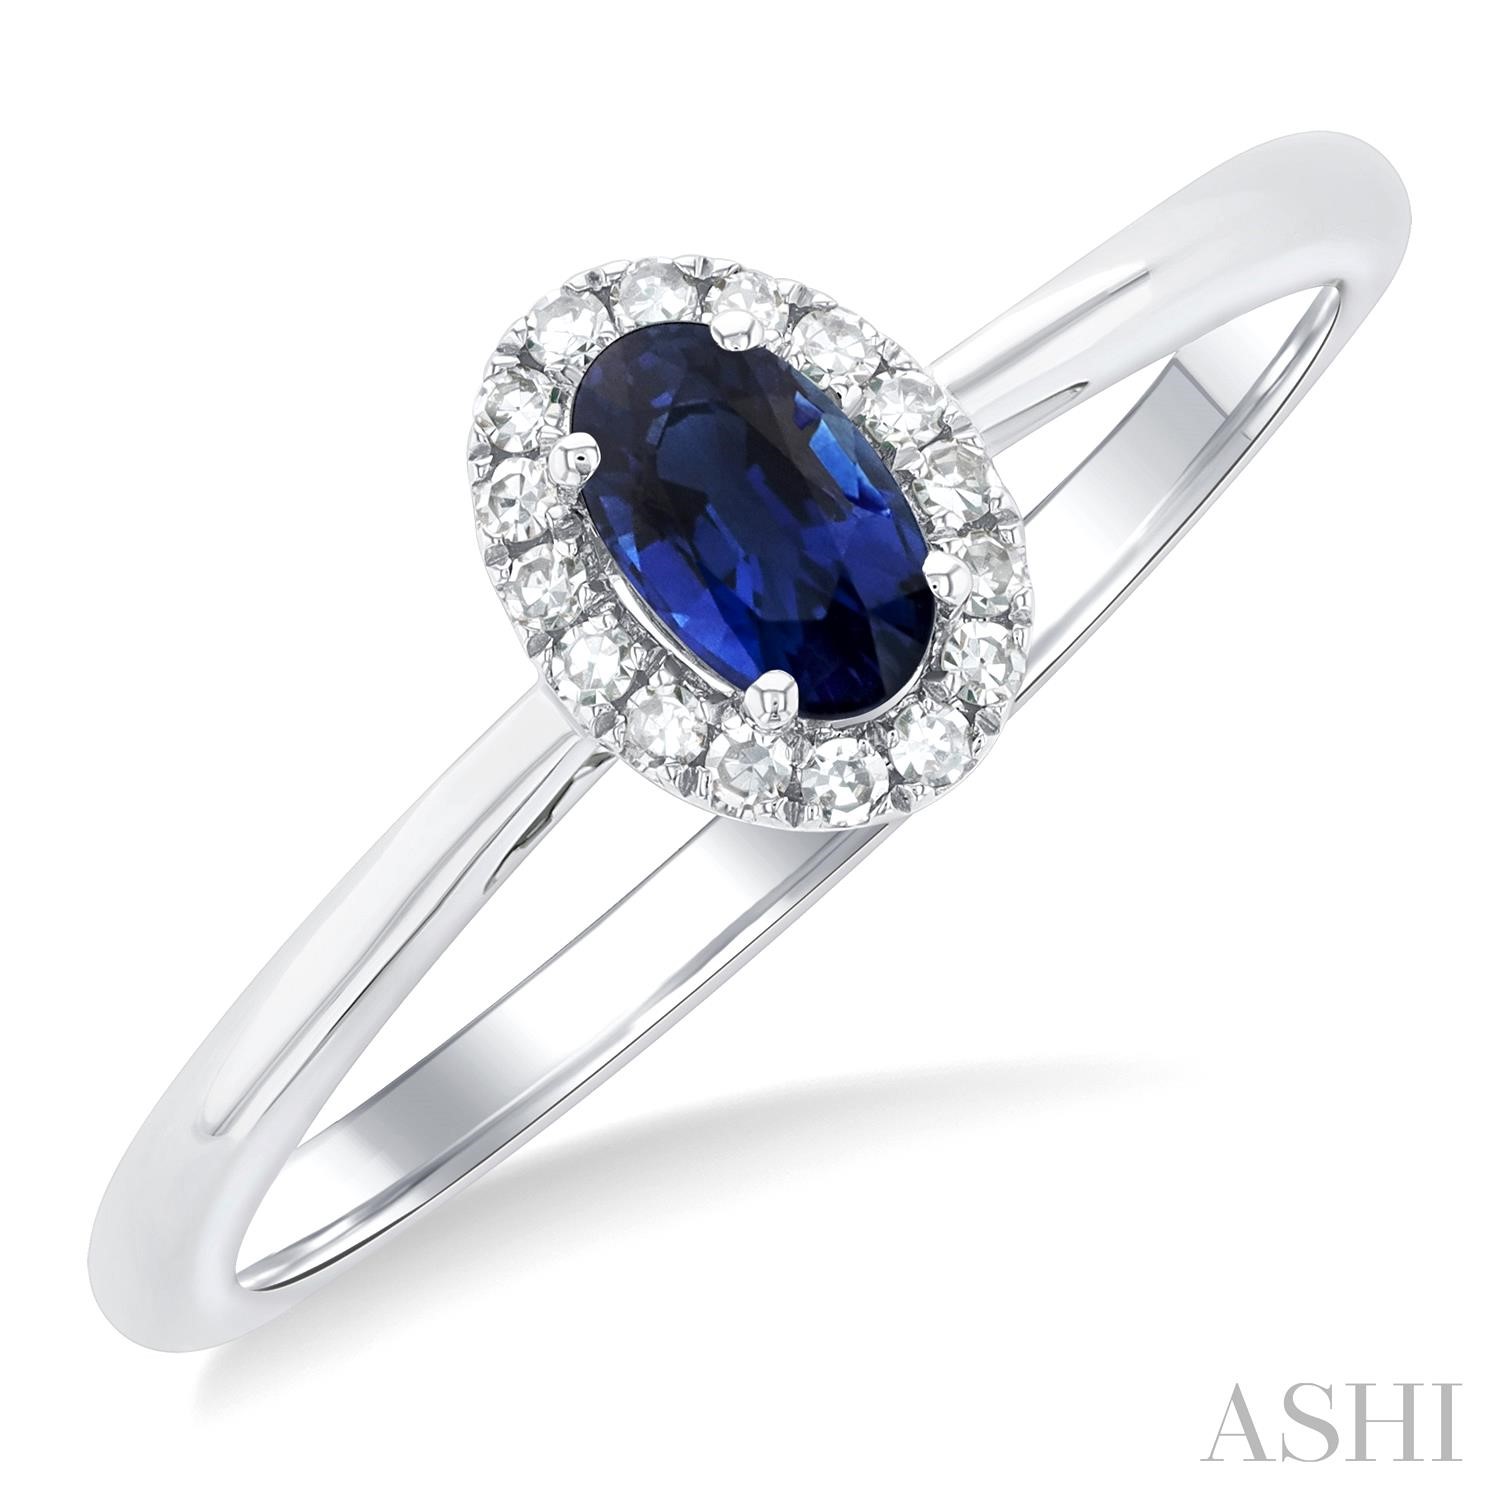 10 Karat White Gold Ring With 5X3mm Oval Sapphire And Diamonds 0.06CTW